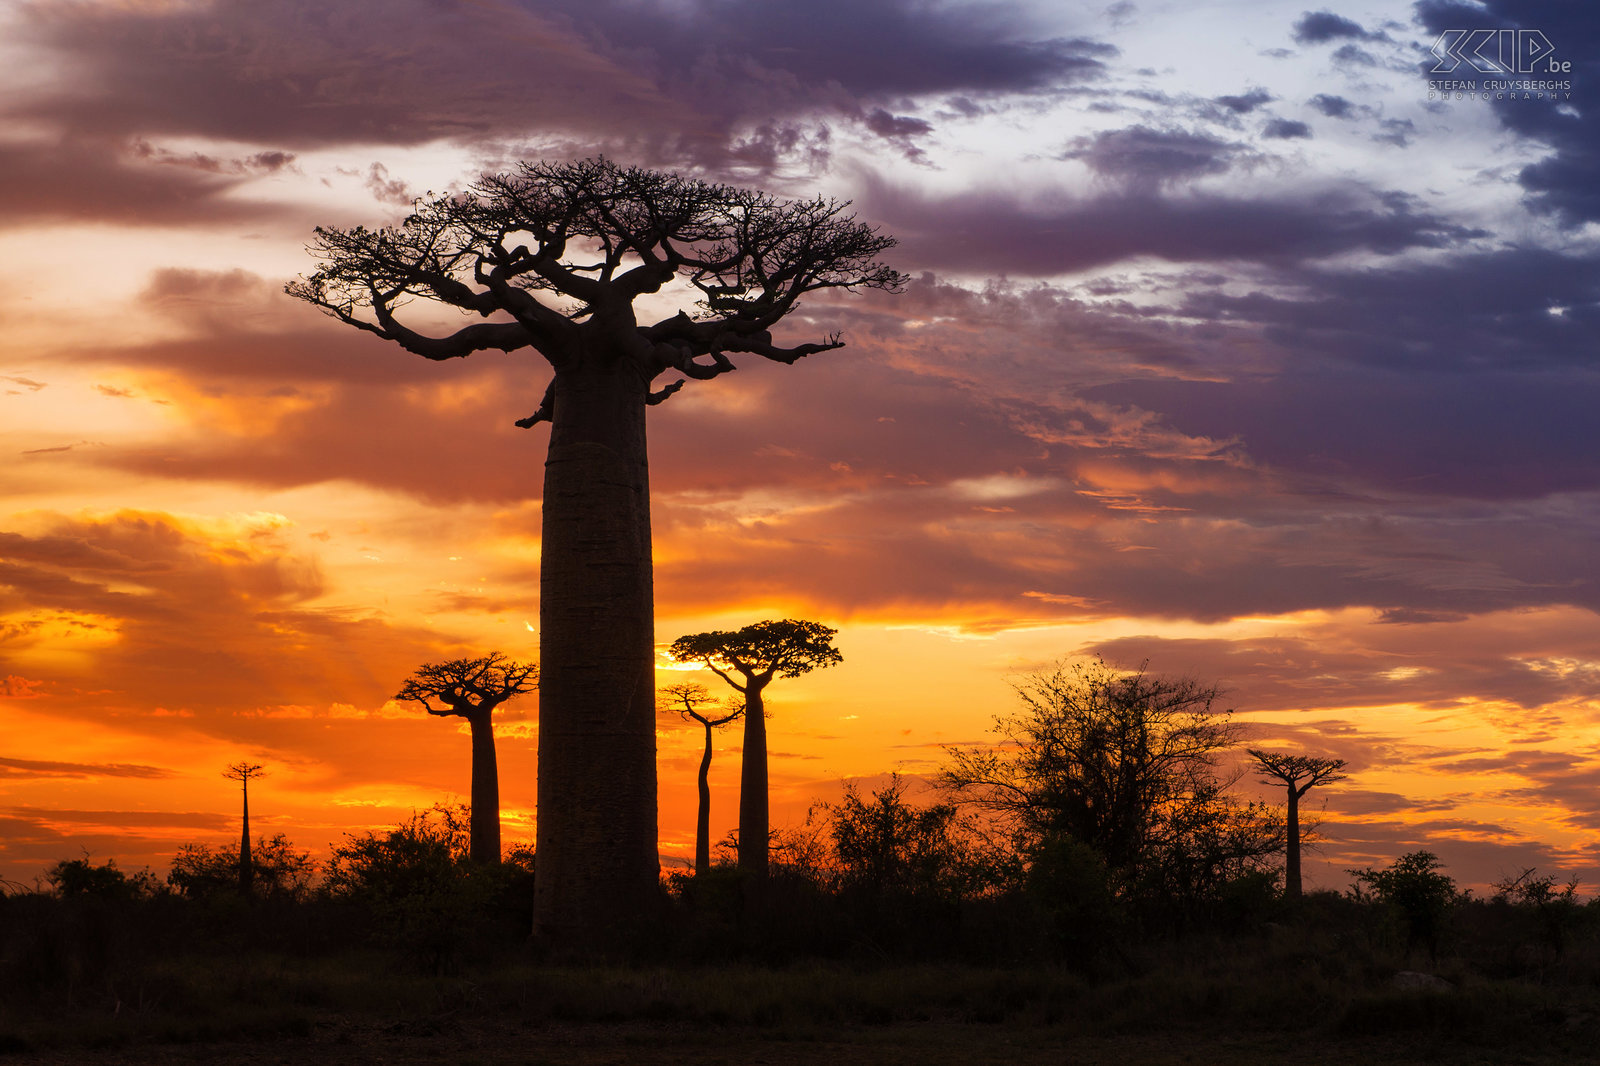 Sunrise at the baobabs The region between Morondava and Belon'i Tsiribihina in western Madagscar has hundreds of impressive baobabs. We went their early to photograph these impressive trees during sunrise. Stefan Cruysberghs